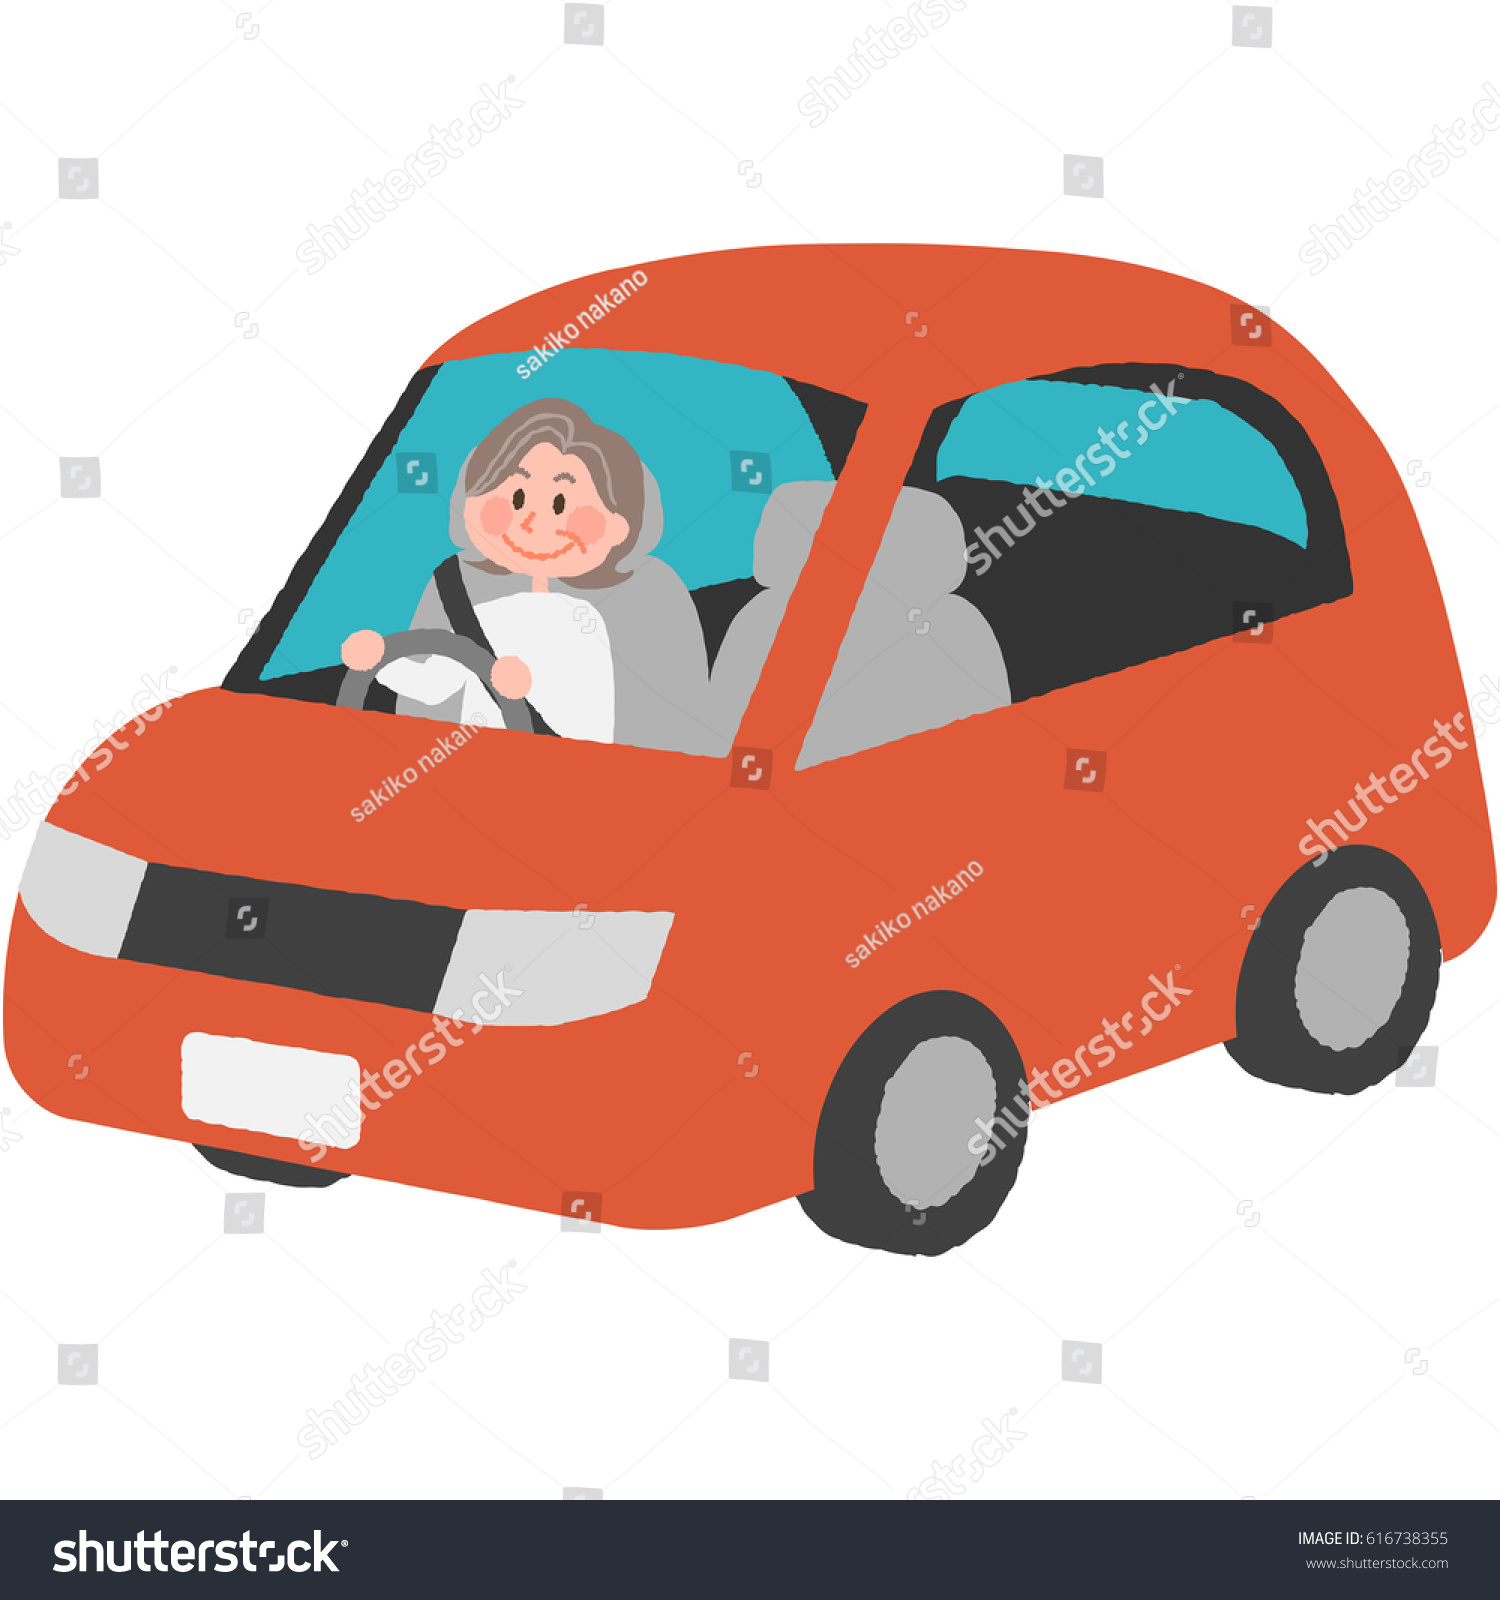 A Vector Illustration Of The Elderly Driver Royalty Free Stock Vector 616738355